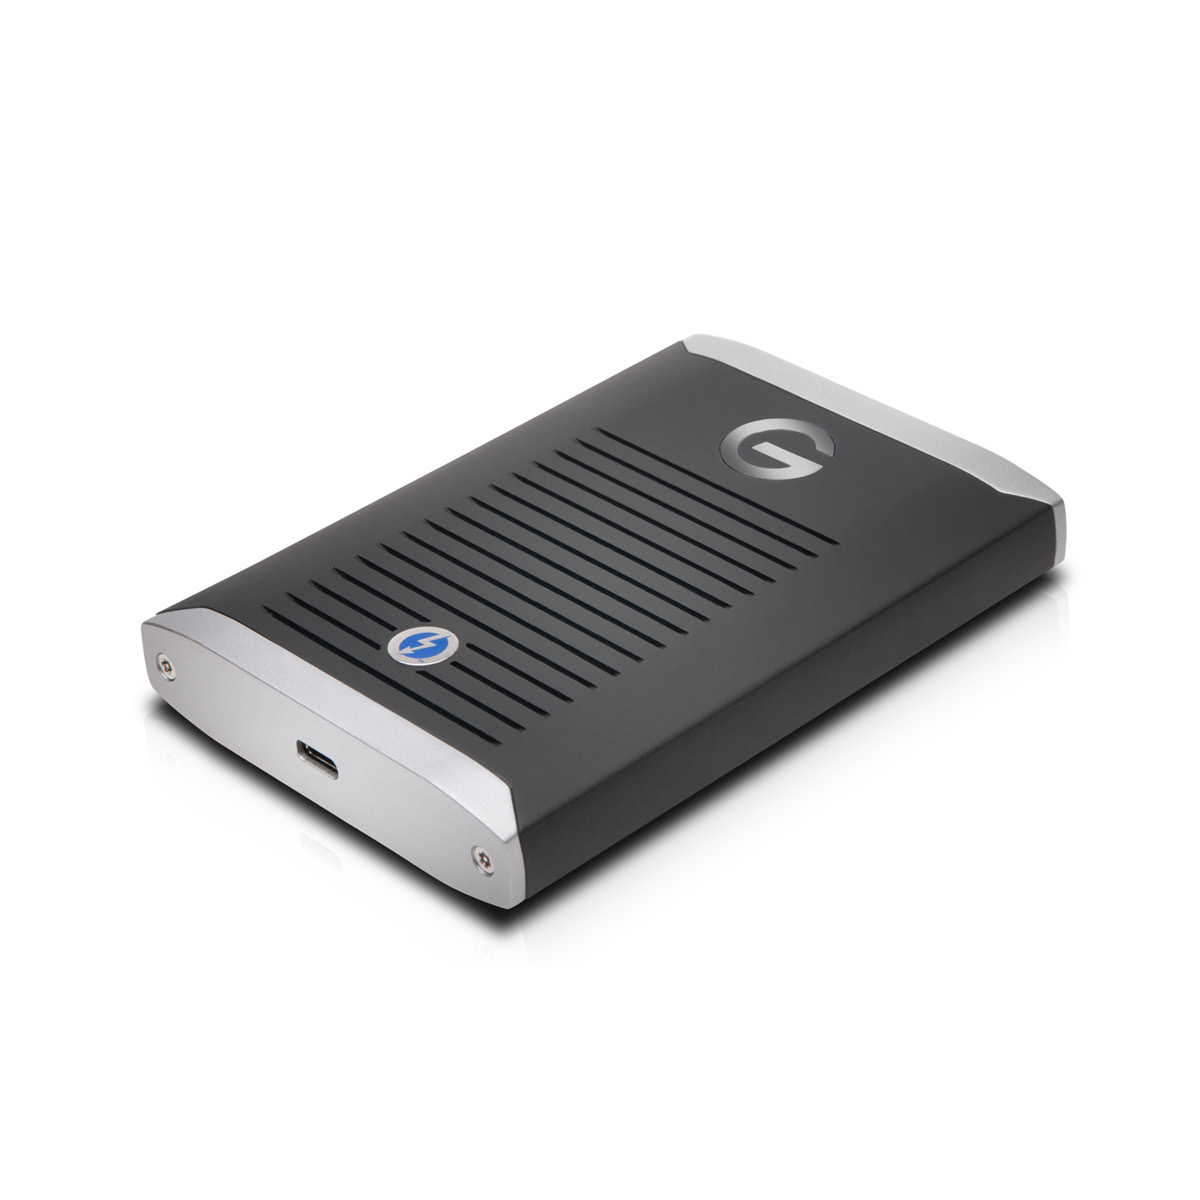 SanDisk Professional 1 TB G-Drive PRO SSD, mobile SSD